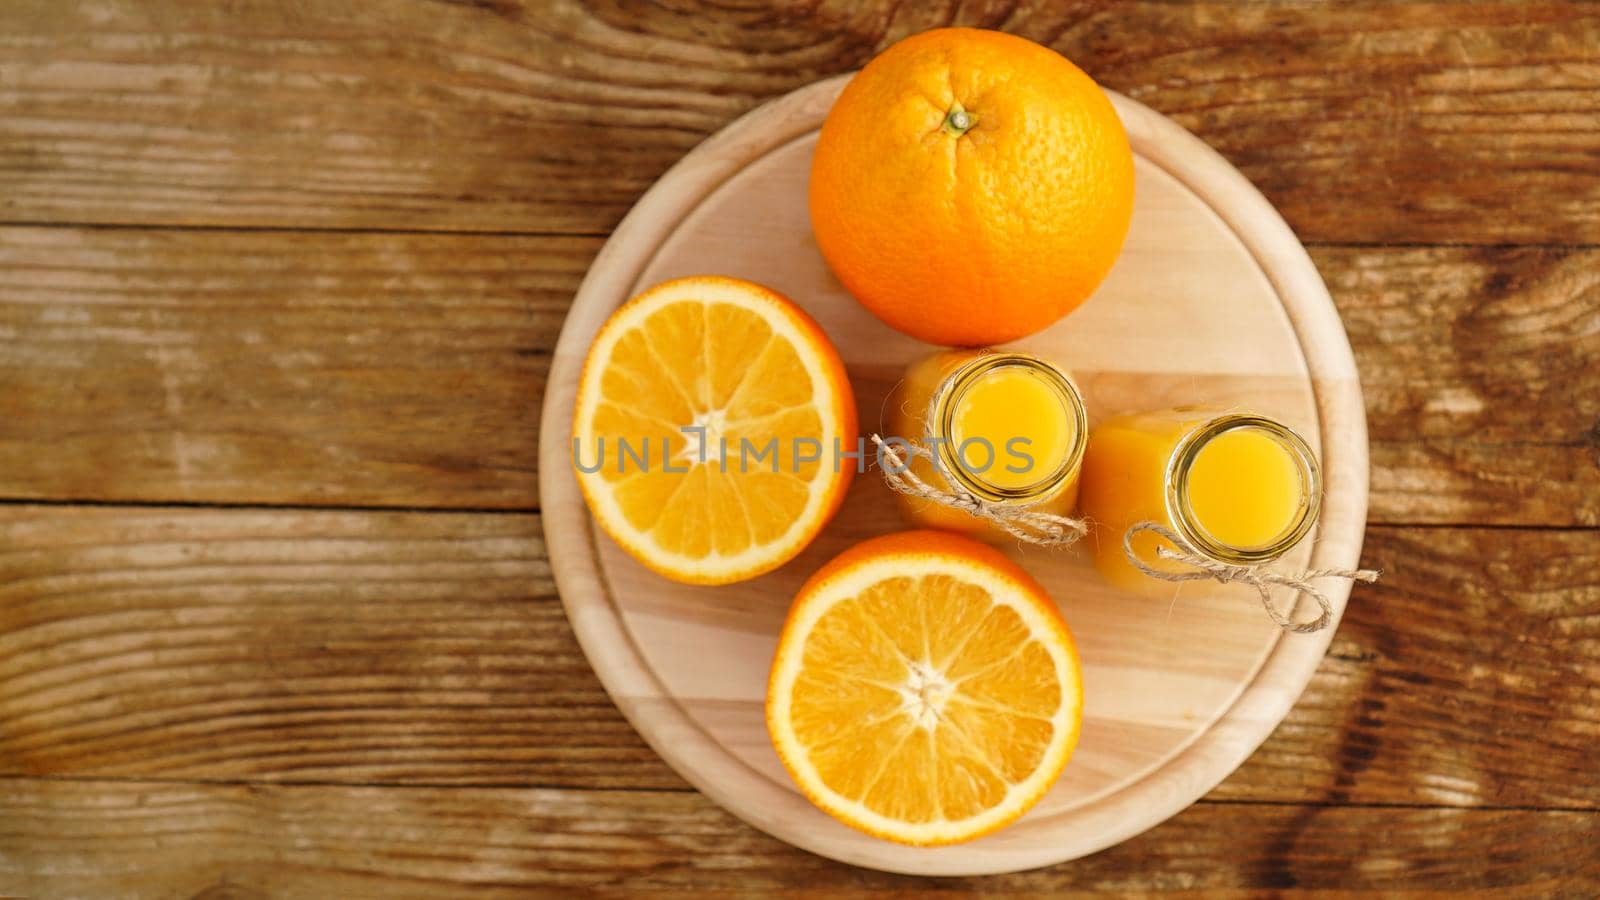 Fresh orange juice on wooden table on a wooden board. Sliced oranges and two bottles of juice. View from above